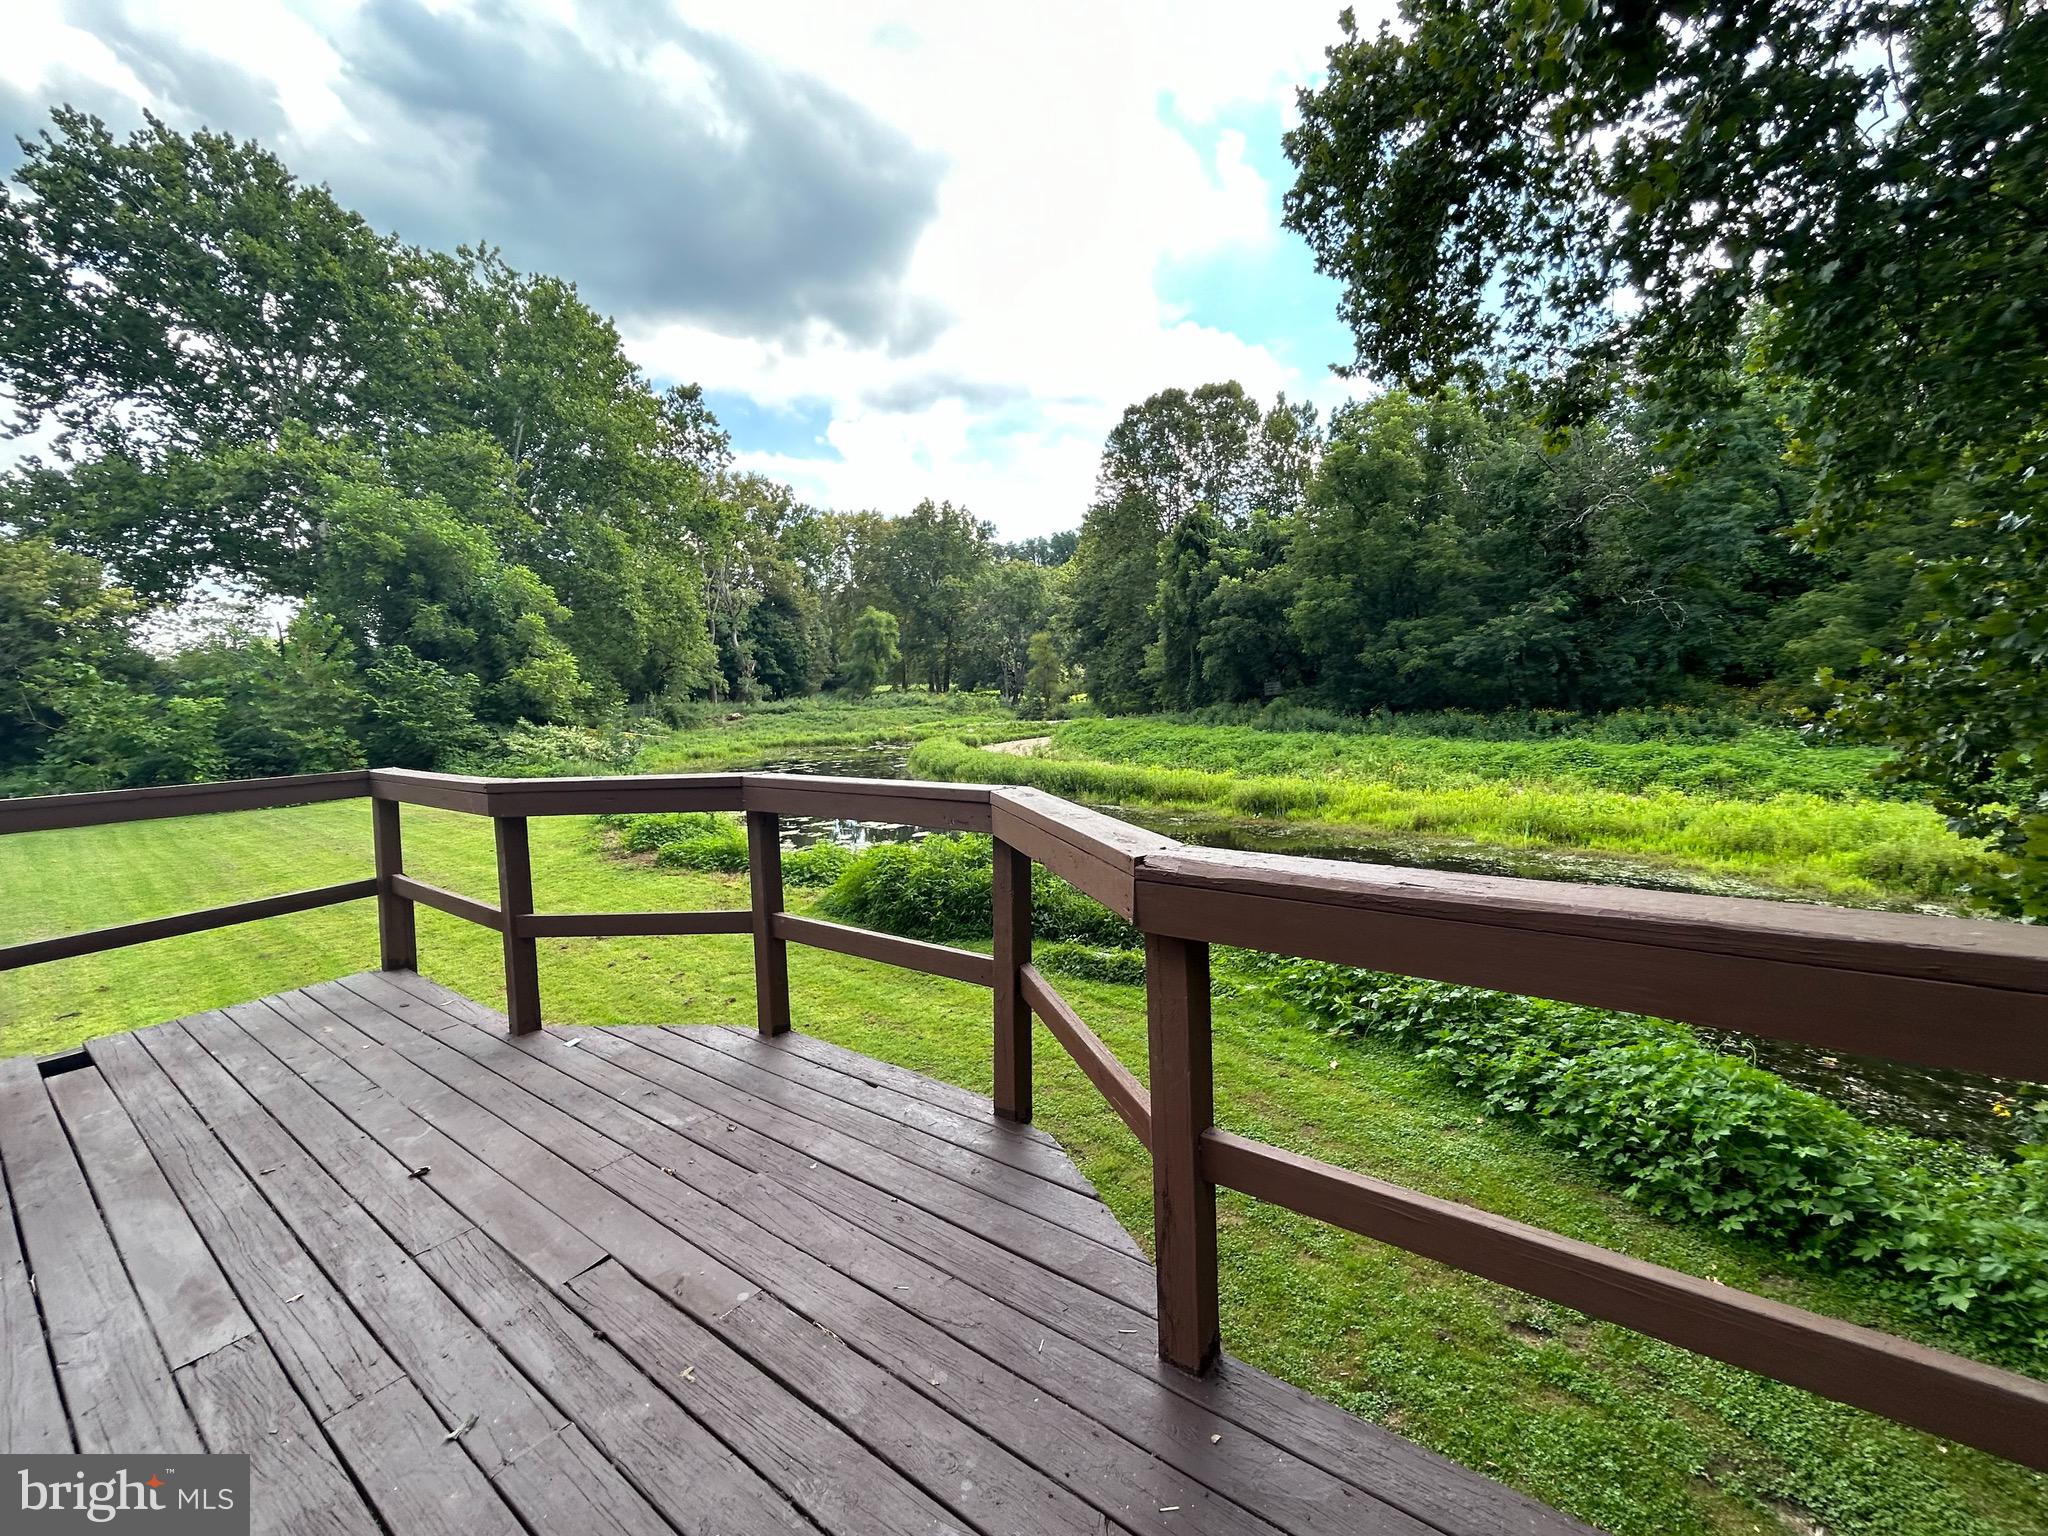 a view of a bench sitting on a wooden deck